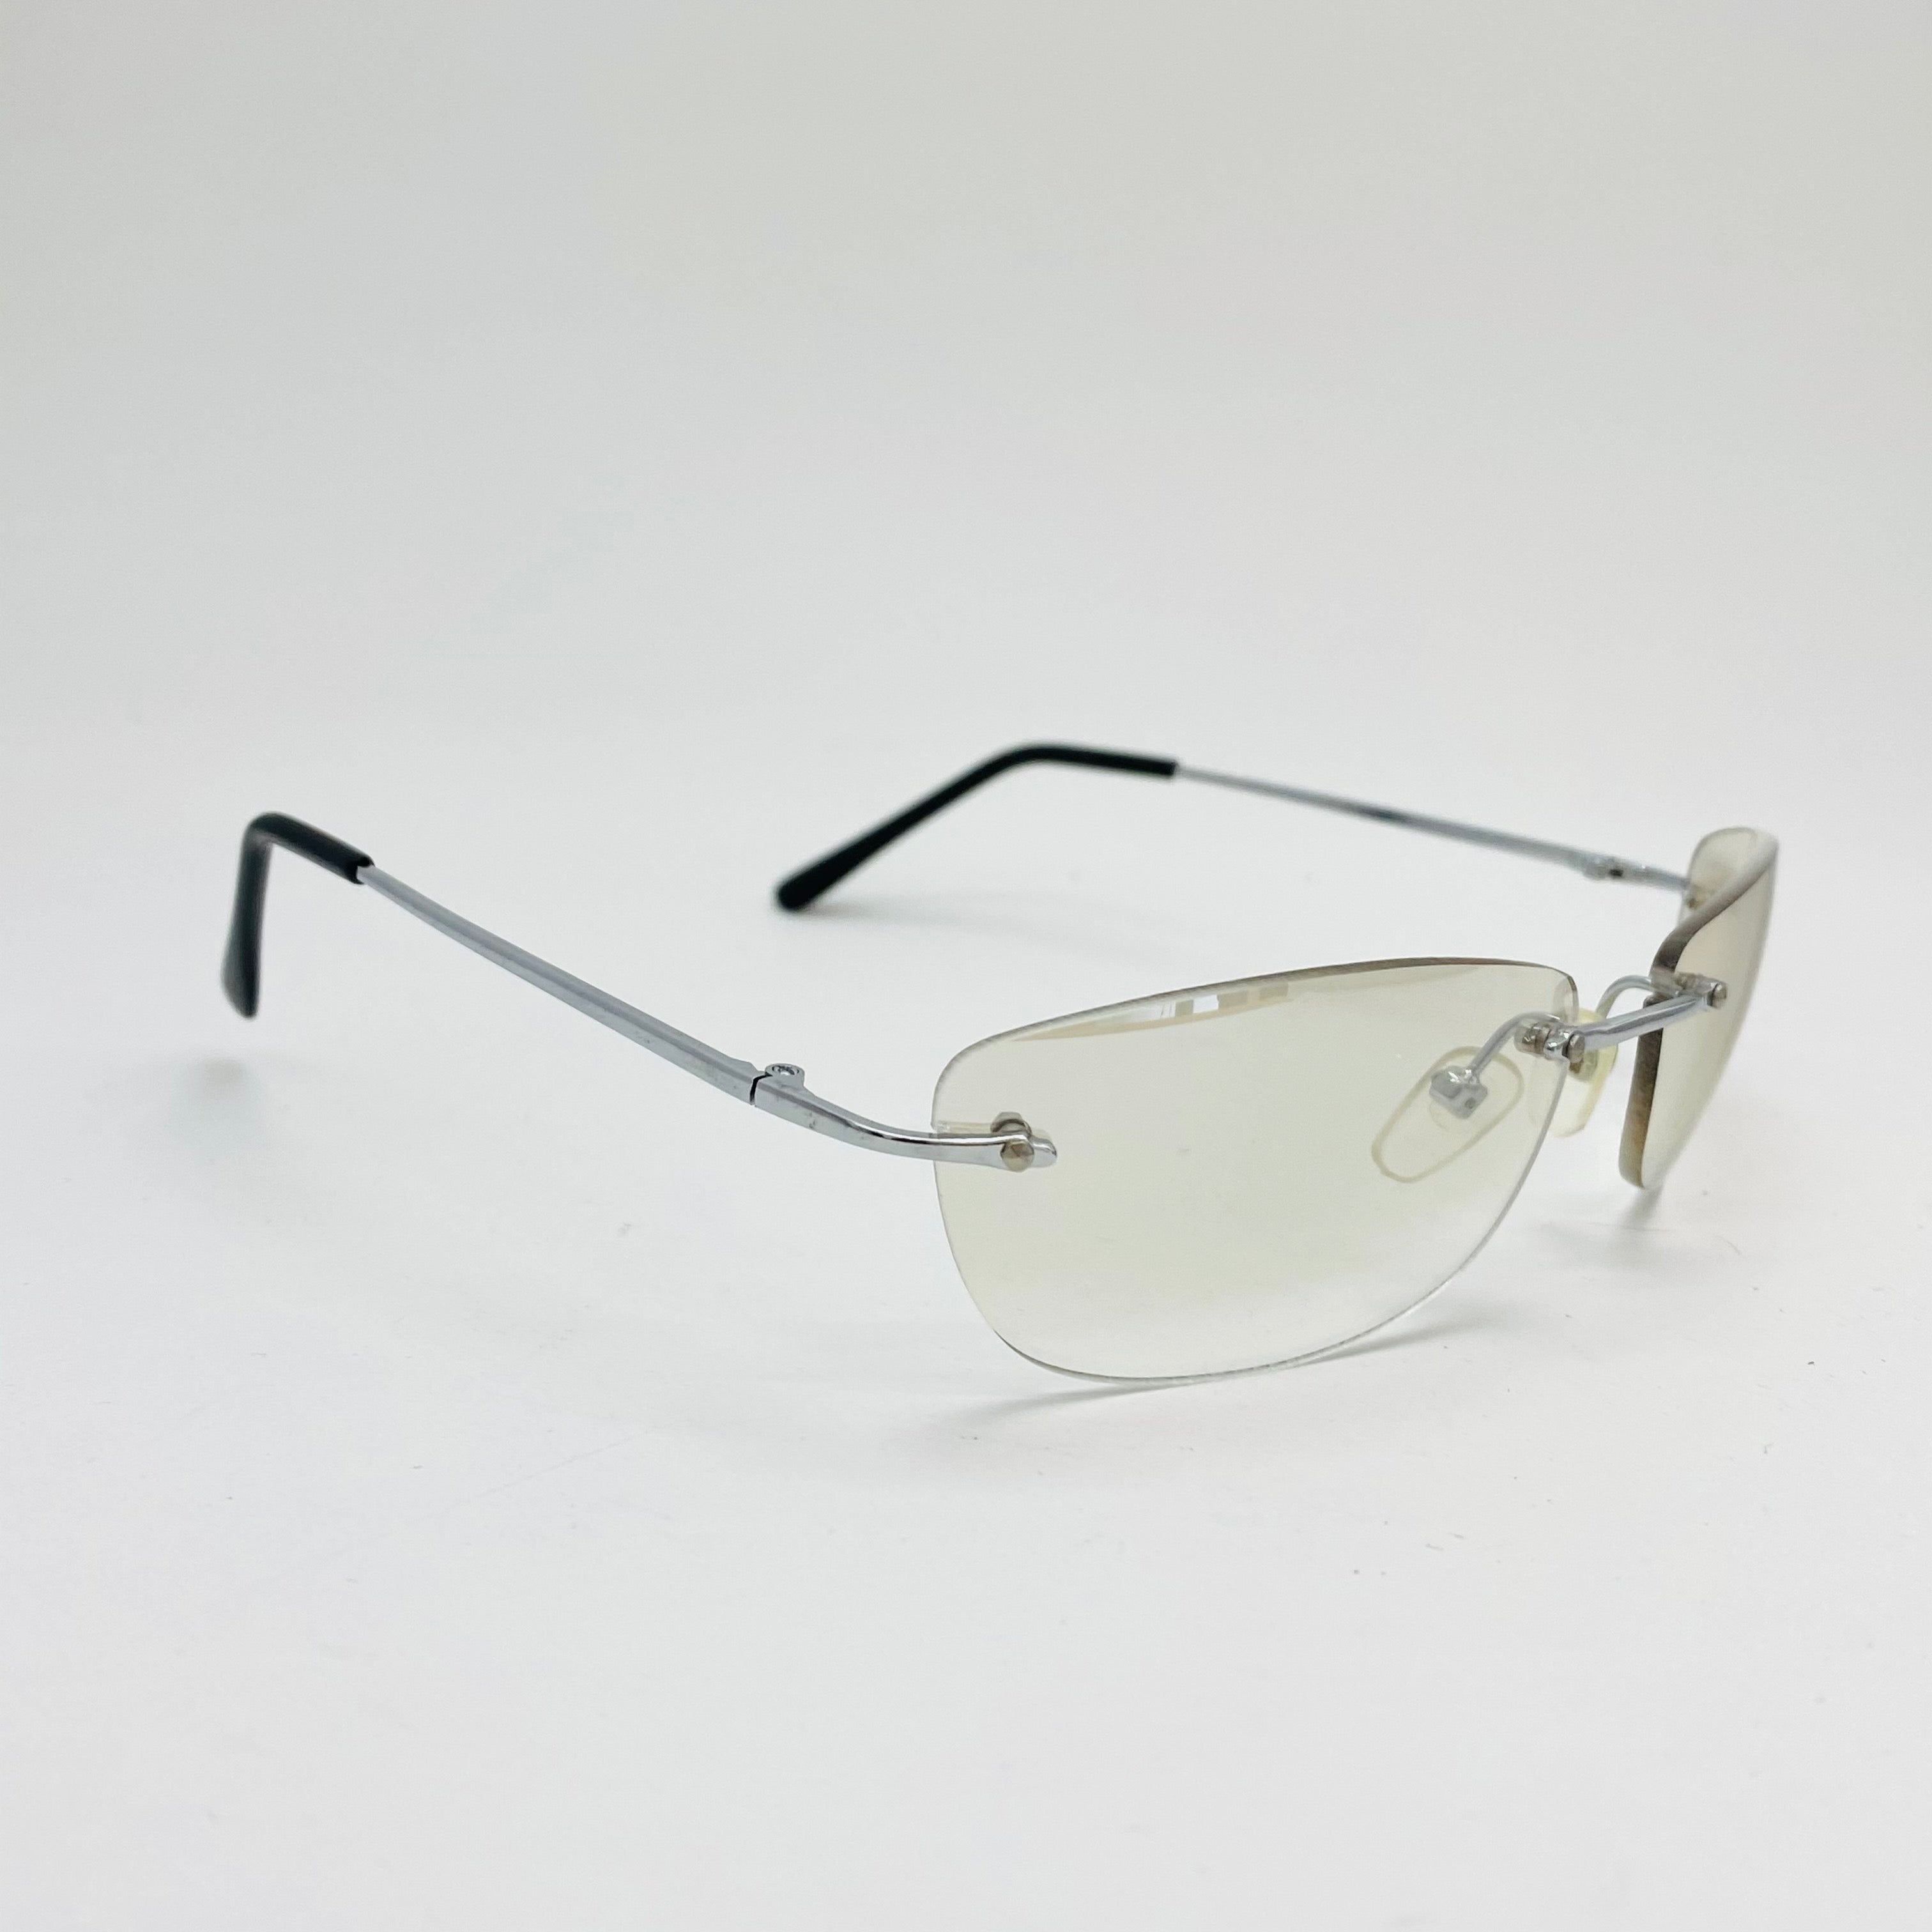 Vintage Small Sized 2000 Clear Non Framed Sunglasses - Silver